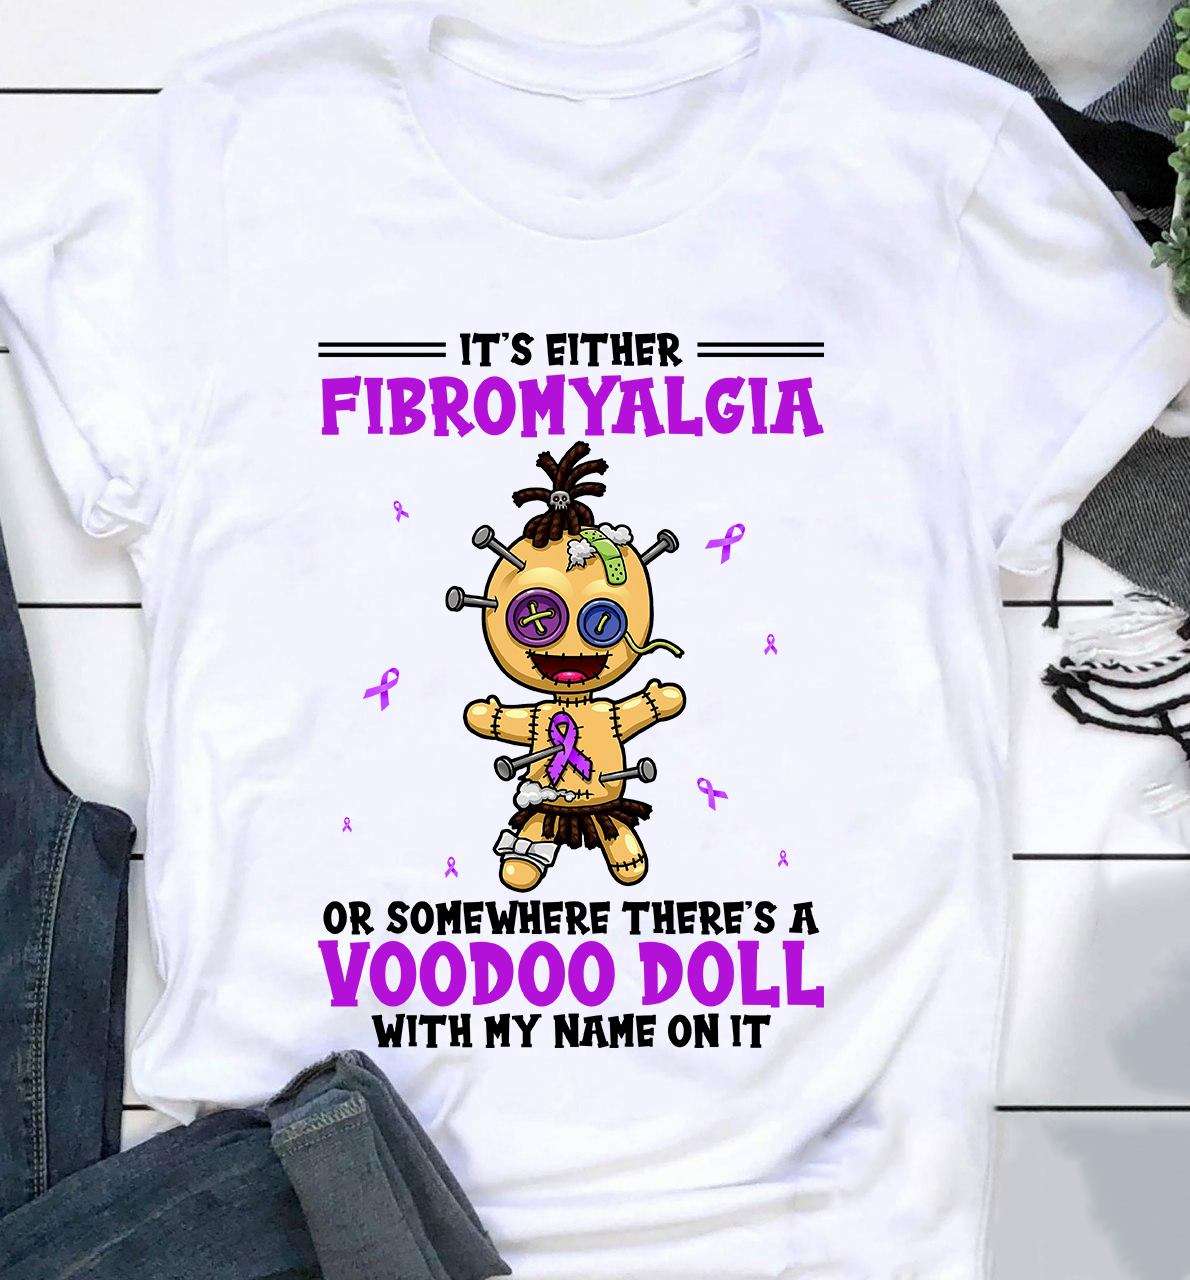 Fibromyalgia VooDoo Doll - It's either fibromyalgia or somewhere there's a voodoo doll with my name on it